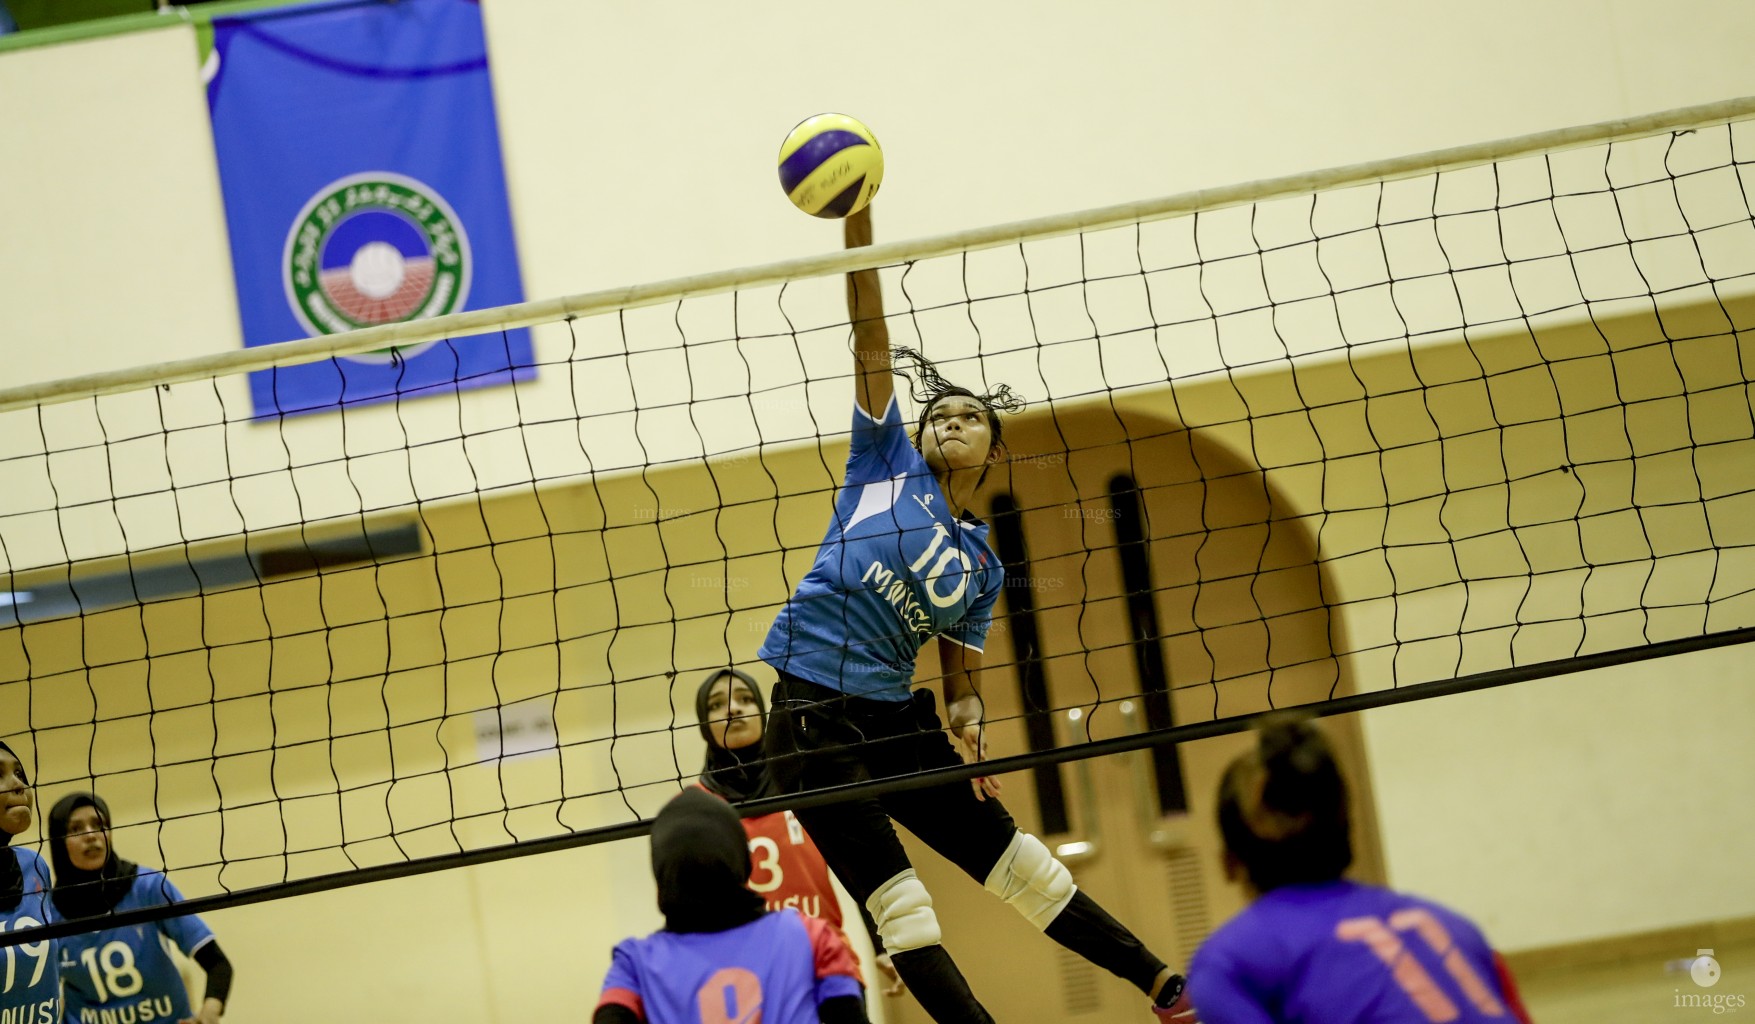 Inter college / university volleyball tournament women's division
Maldives national university vs cyryx college - Male , Maldives. 7th MARCH 2017 (Images.mv Photo: Mohamed Ahsan)